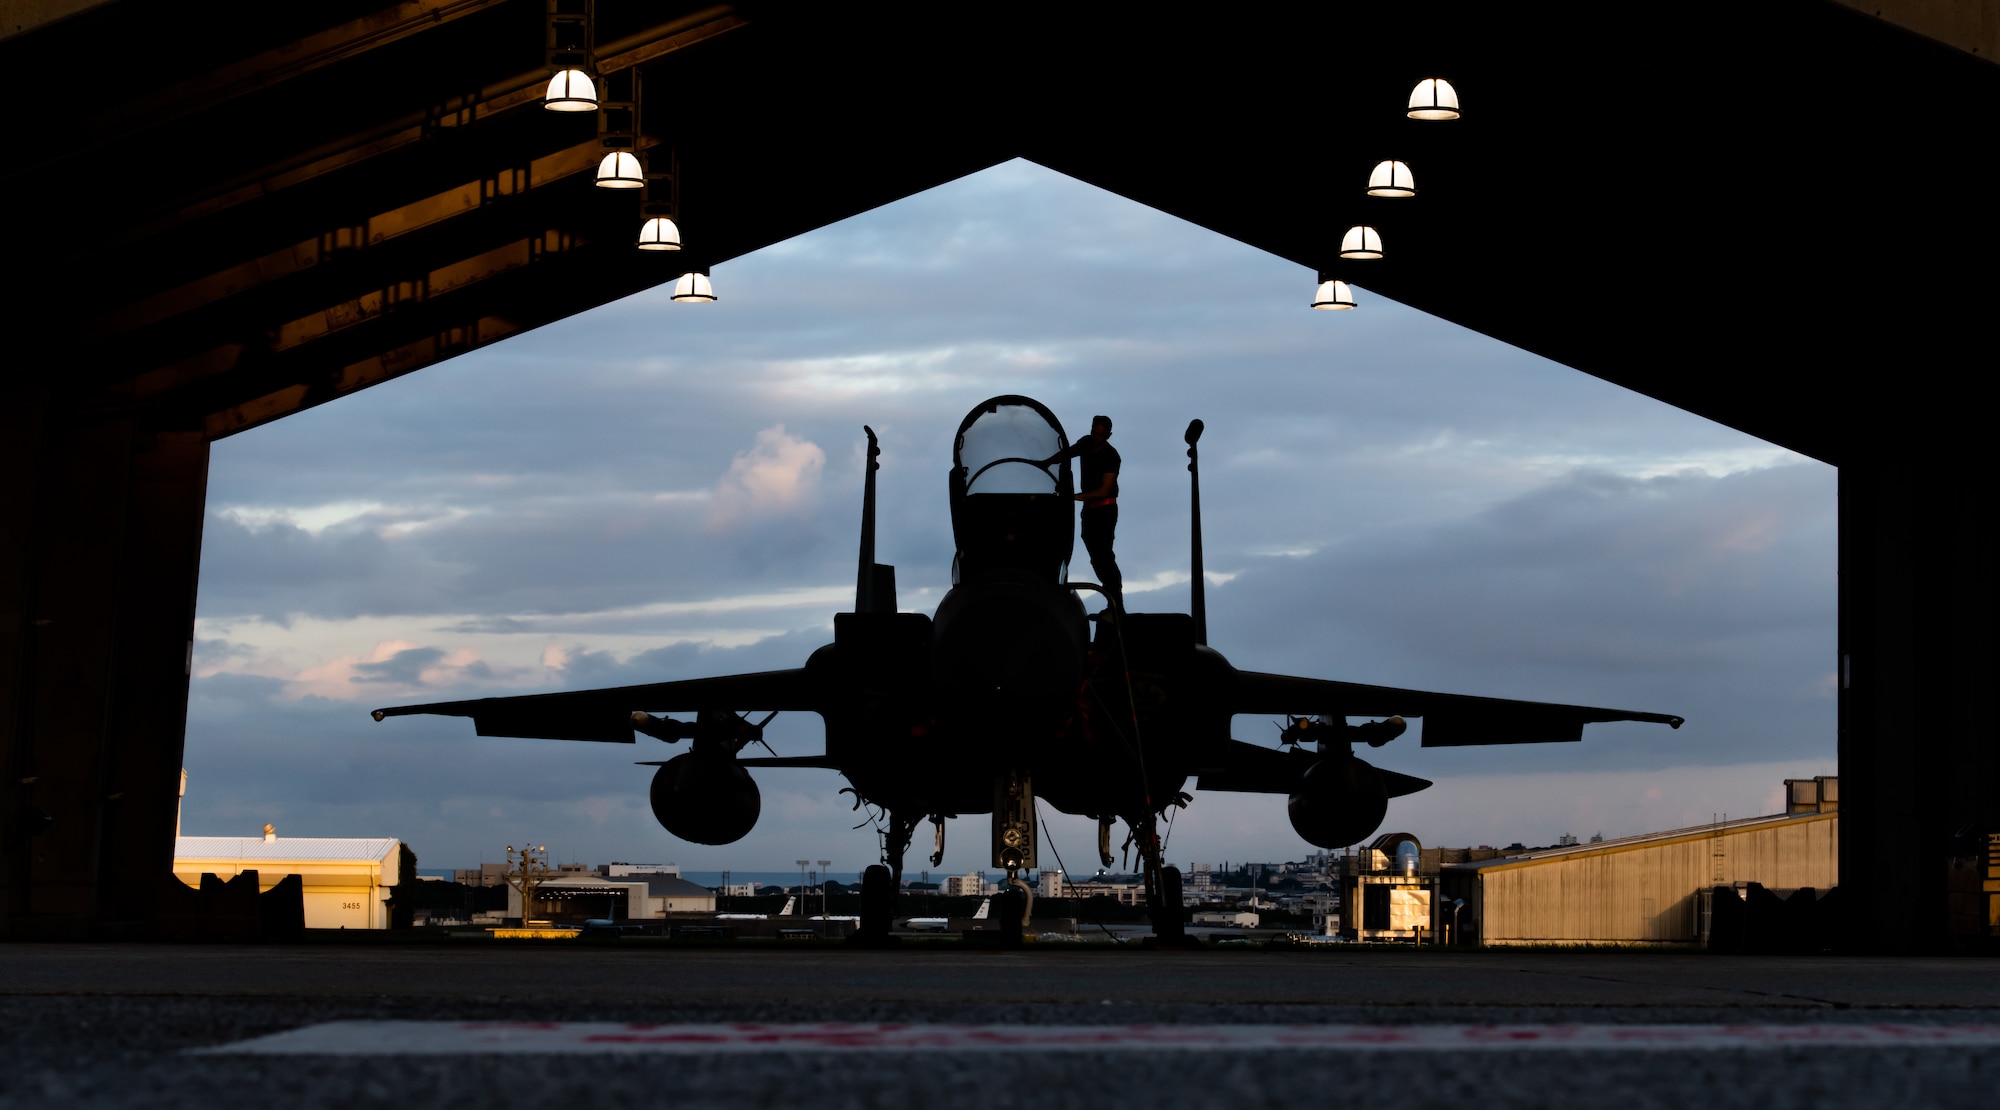 The silhouette of an Airman wiping the canopy of an F-15 centered in hangar with the sunrise in the background.